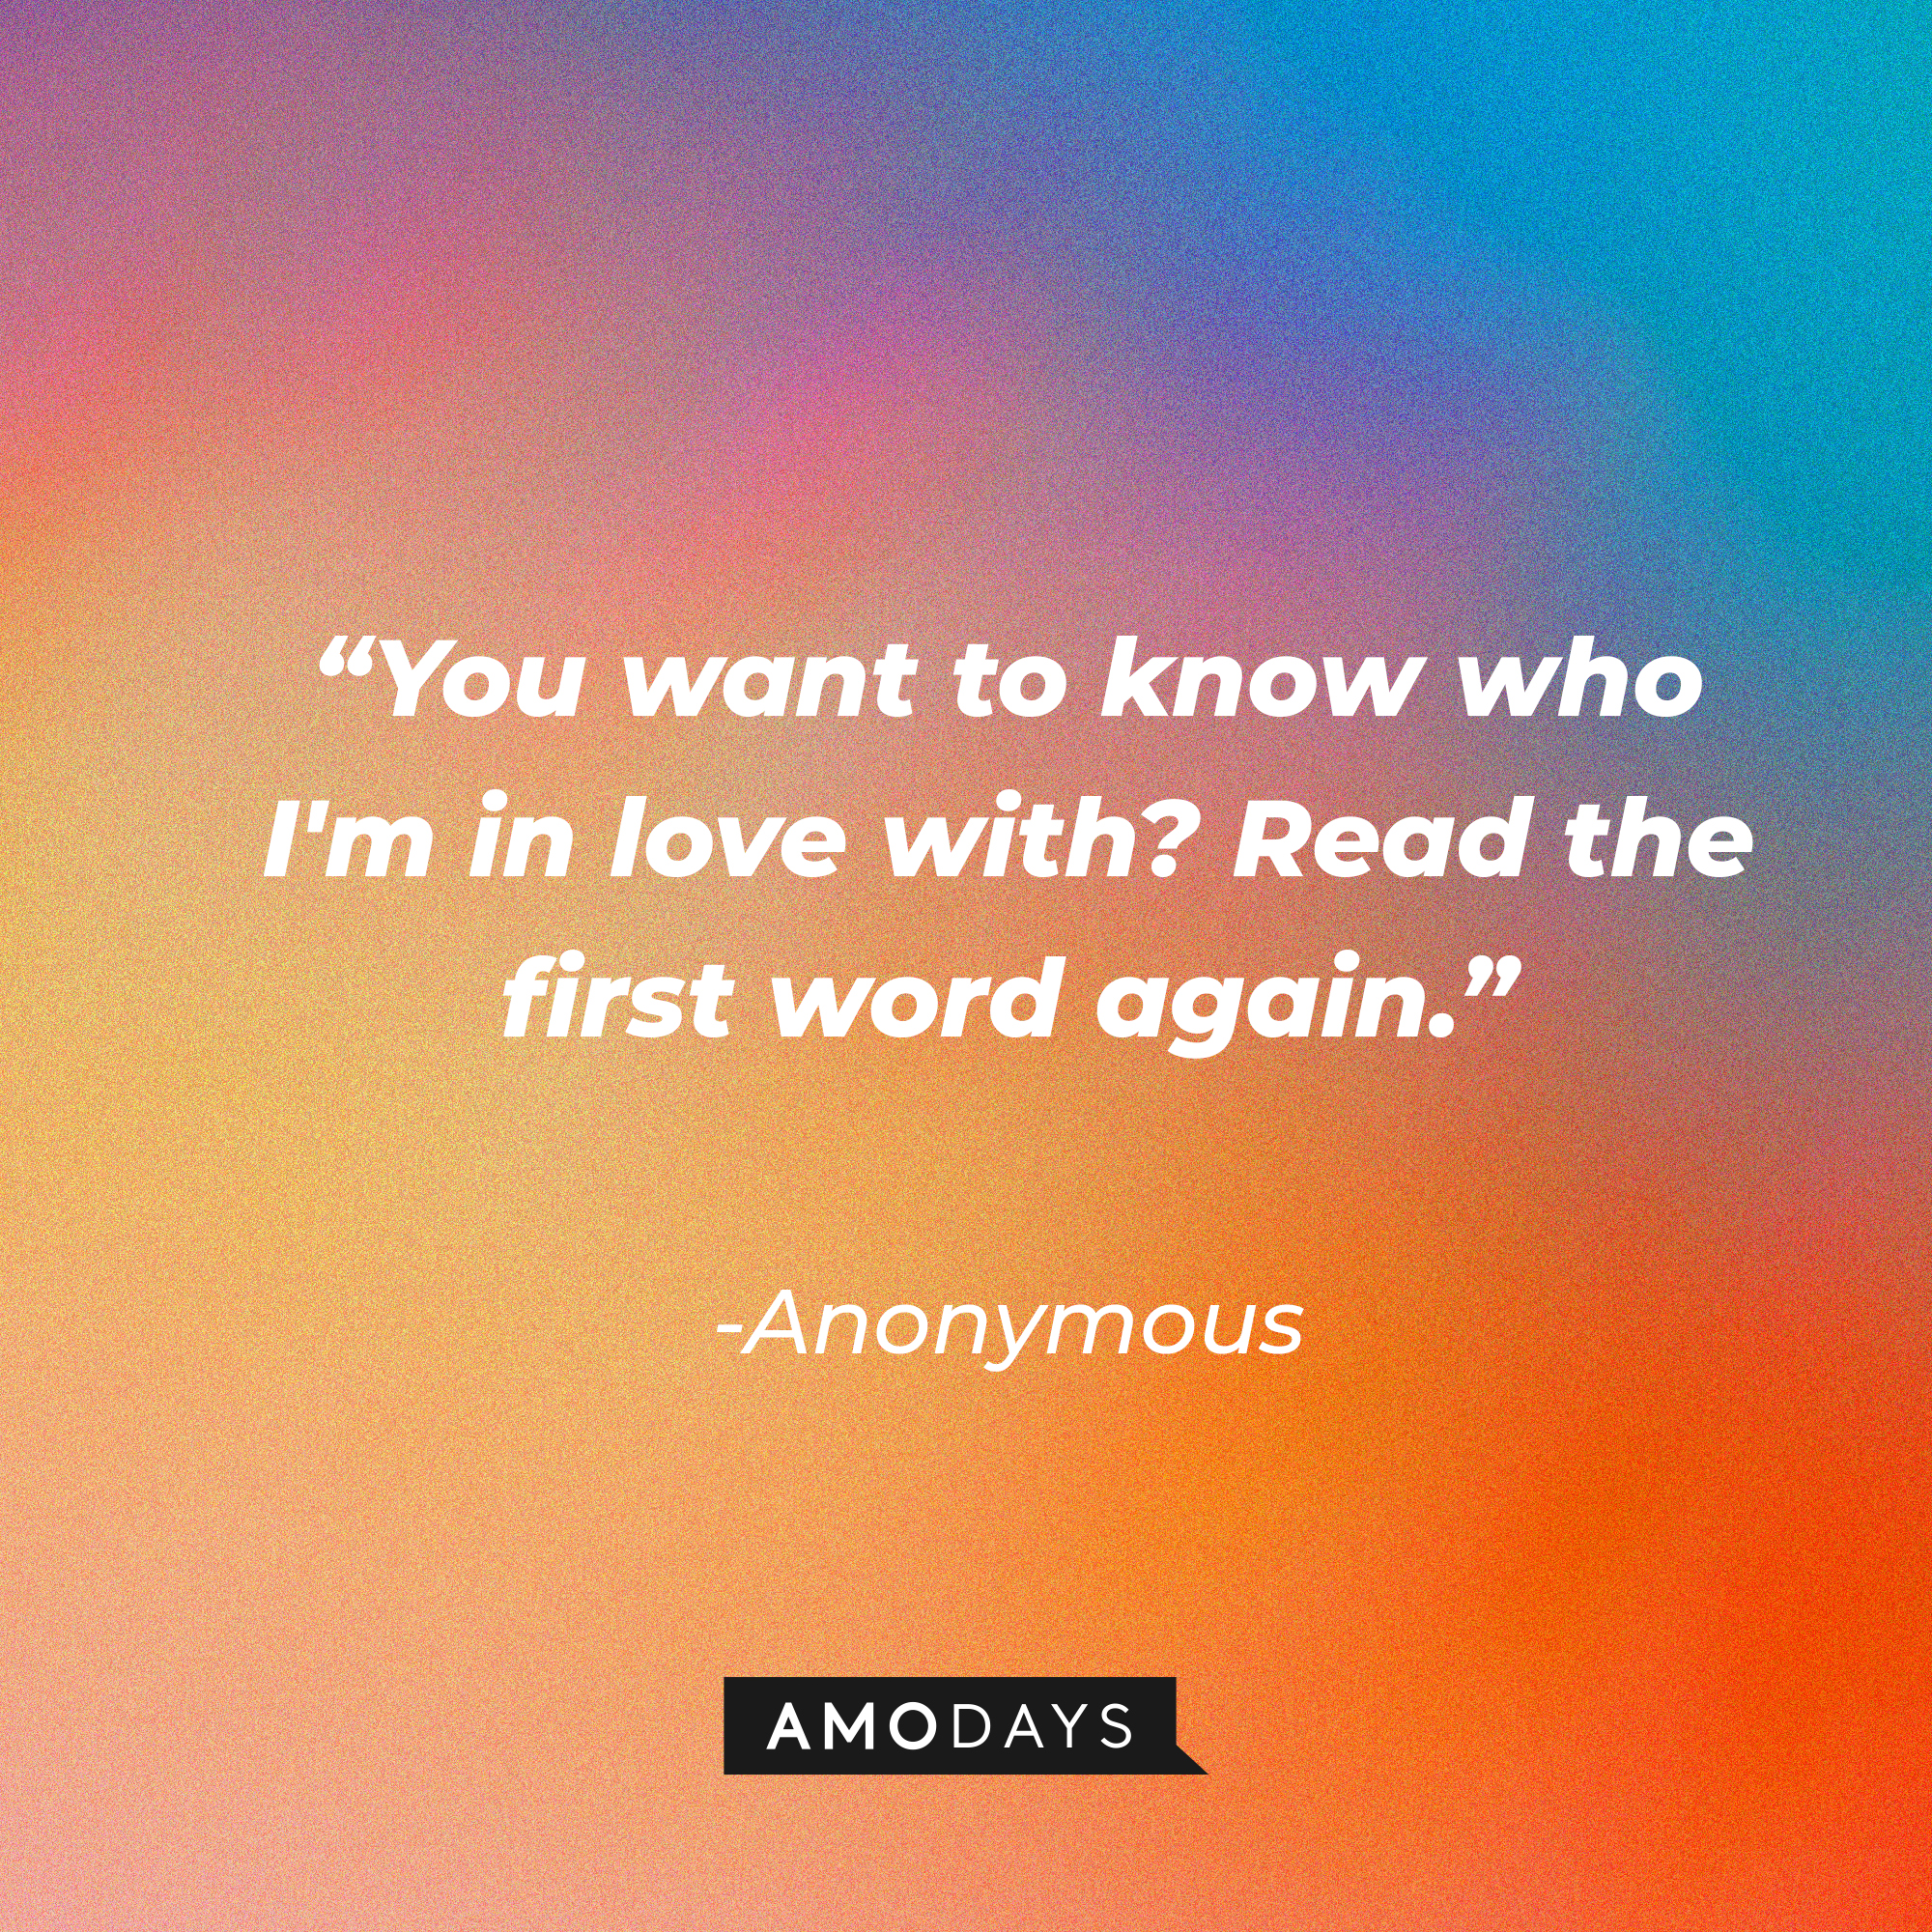 Anonymous quote: “You want to know who I'm in love with? Read the first word again.” | Source: Amodays